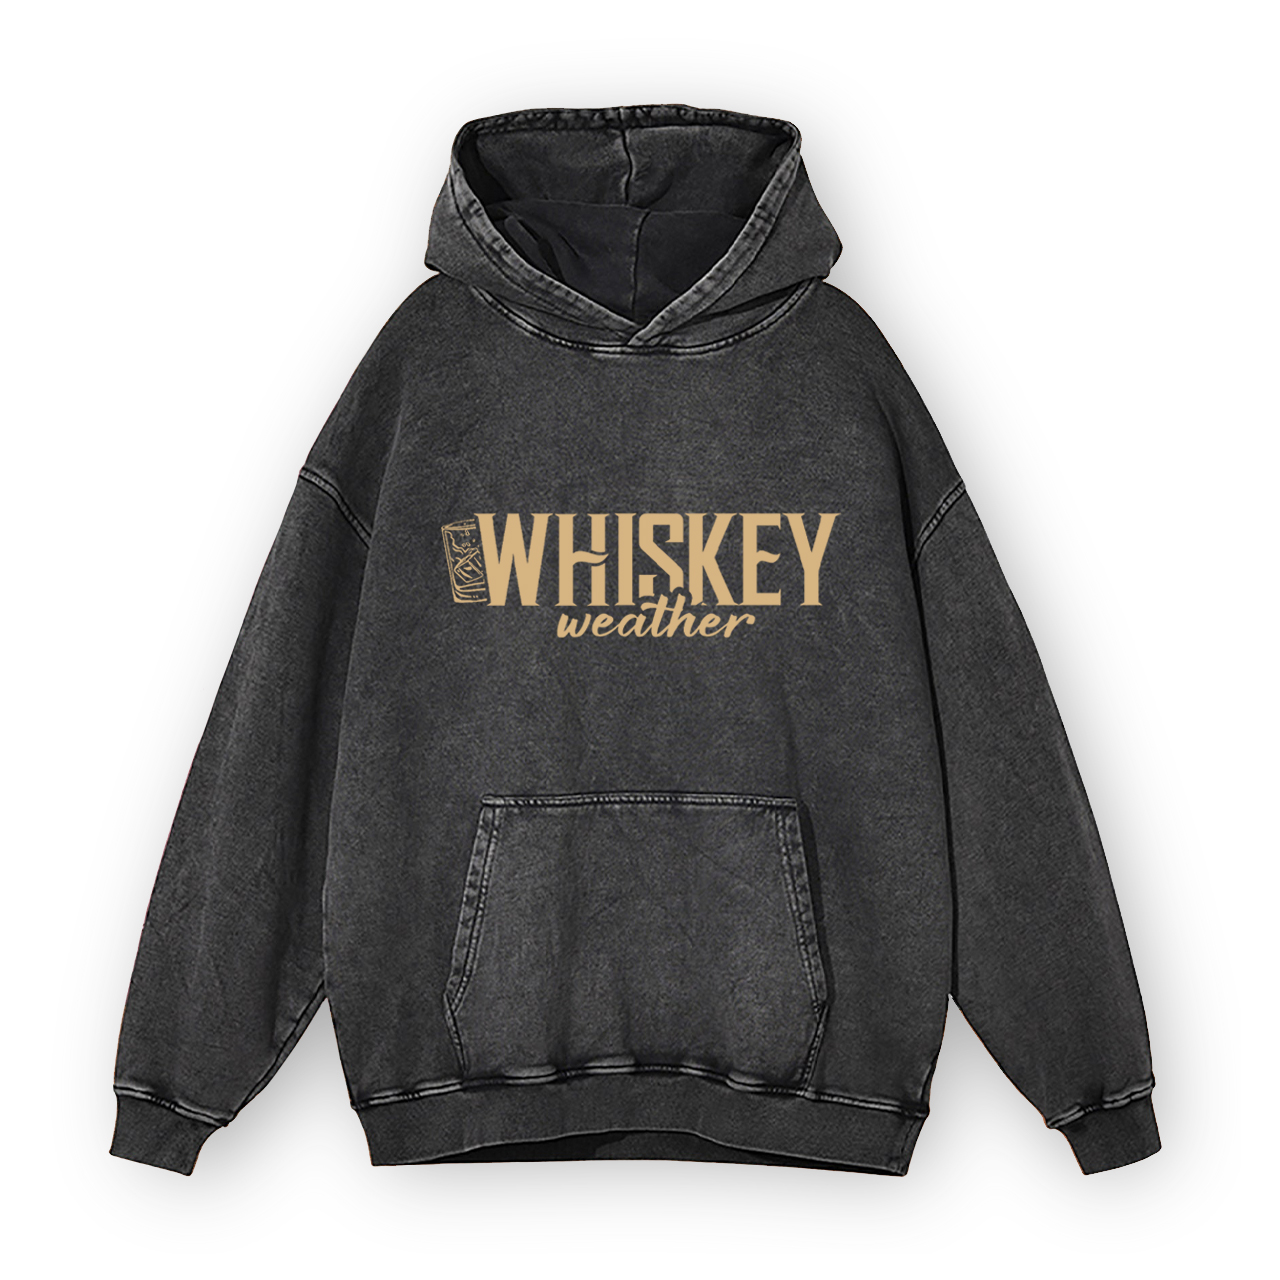 Whiskey Weather Alcohol Lover Gifts Garment-Dye Hoodies